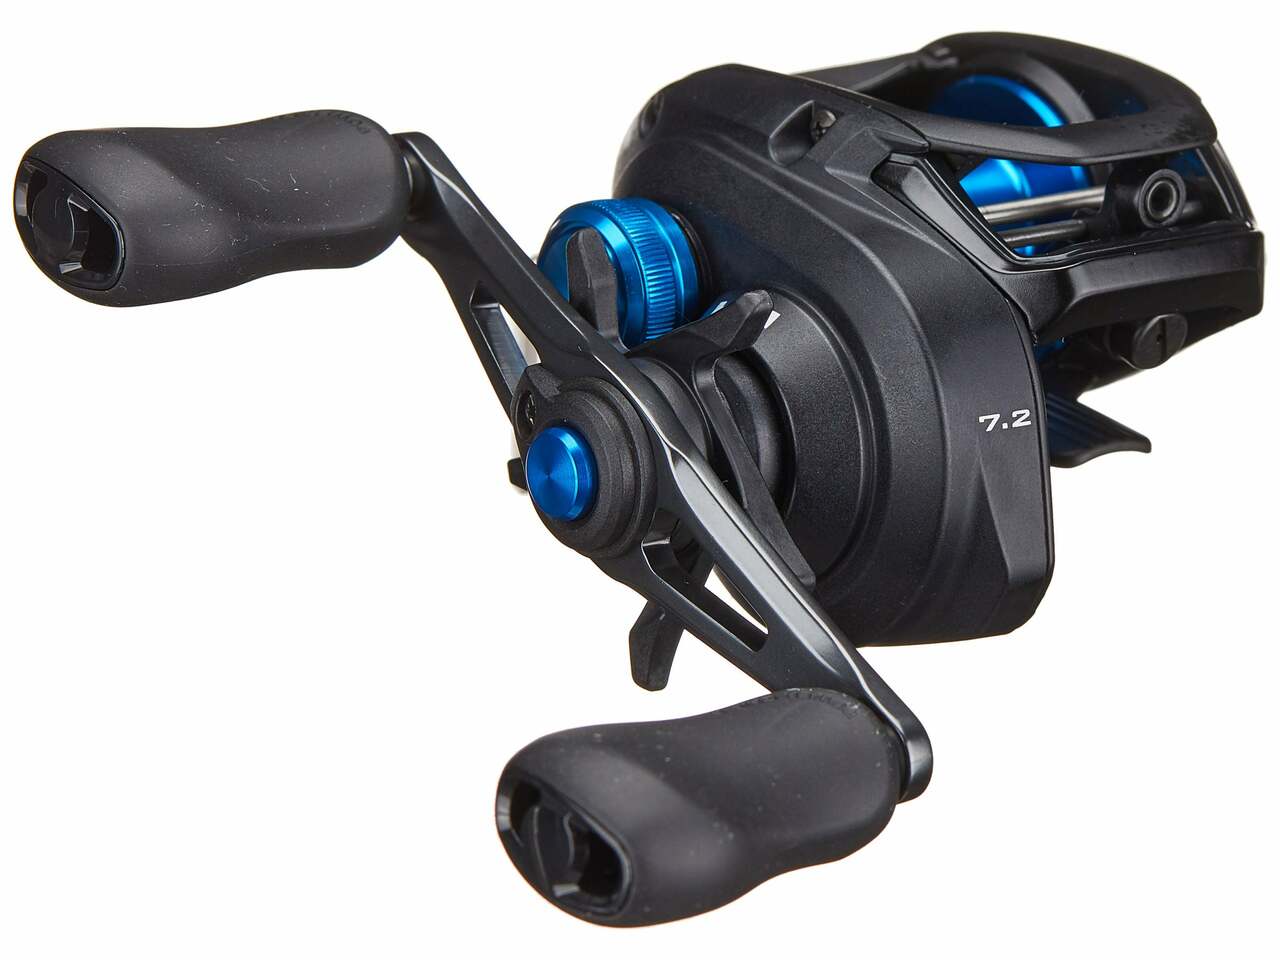 A true workhorse, the Shimano SLX Casting Reel utilizes key Shimano technologies to provide competitive anglers with a dependable, performance-oriented reel that won’t break the bank. Providing a smaller profile without sacrificing line capacity, the Shimano SLX Casting Reel is over 20% more compact than the Shimano Caenon, while maintaining the same line capacity.